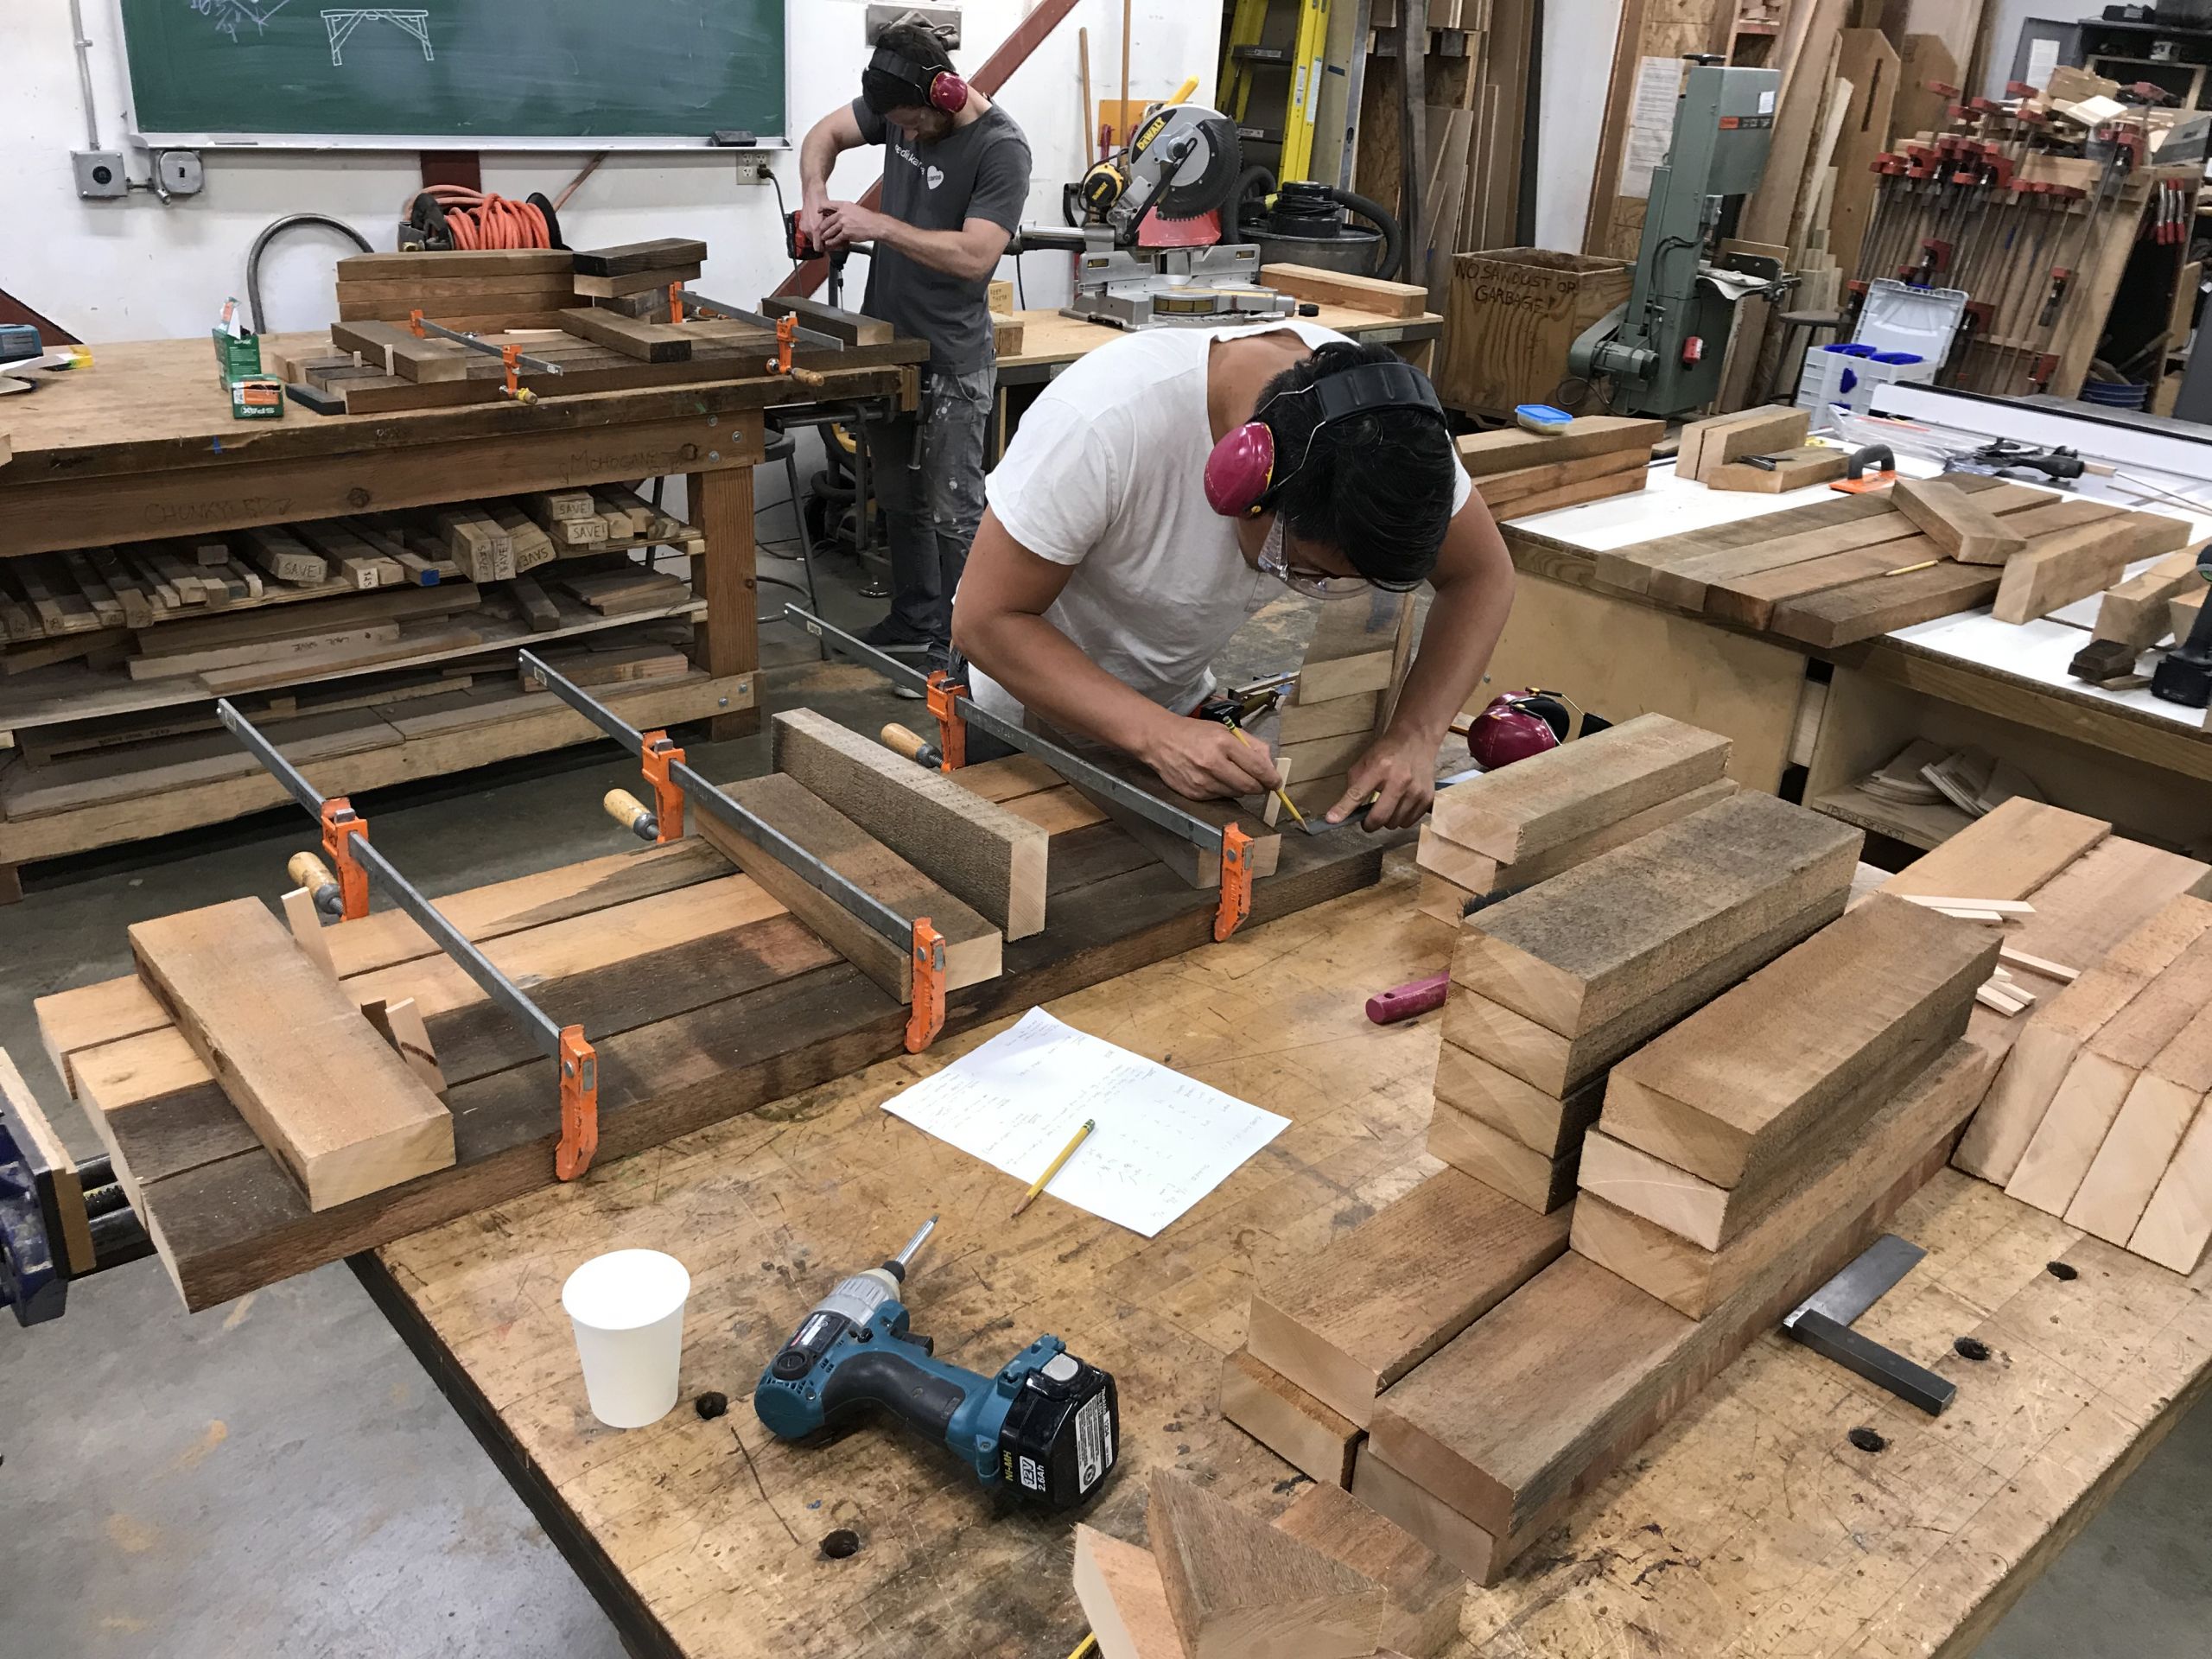 How to get a woodworking job